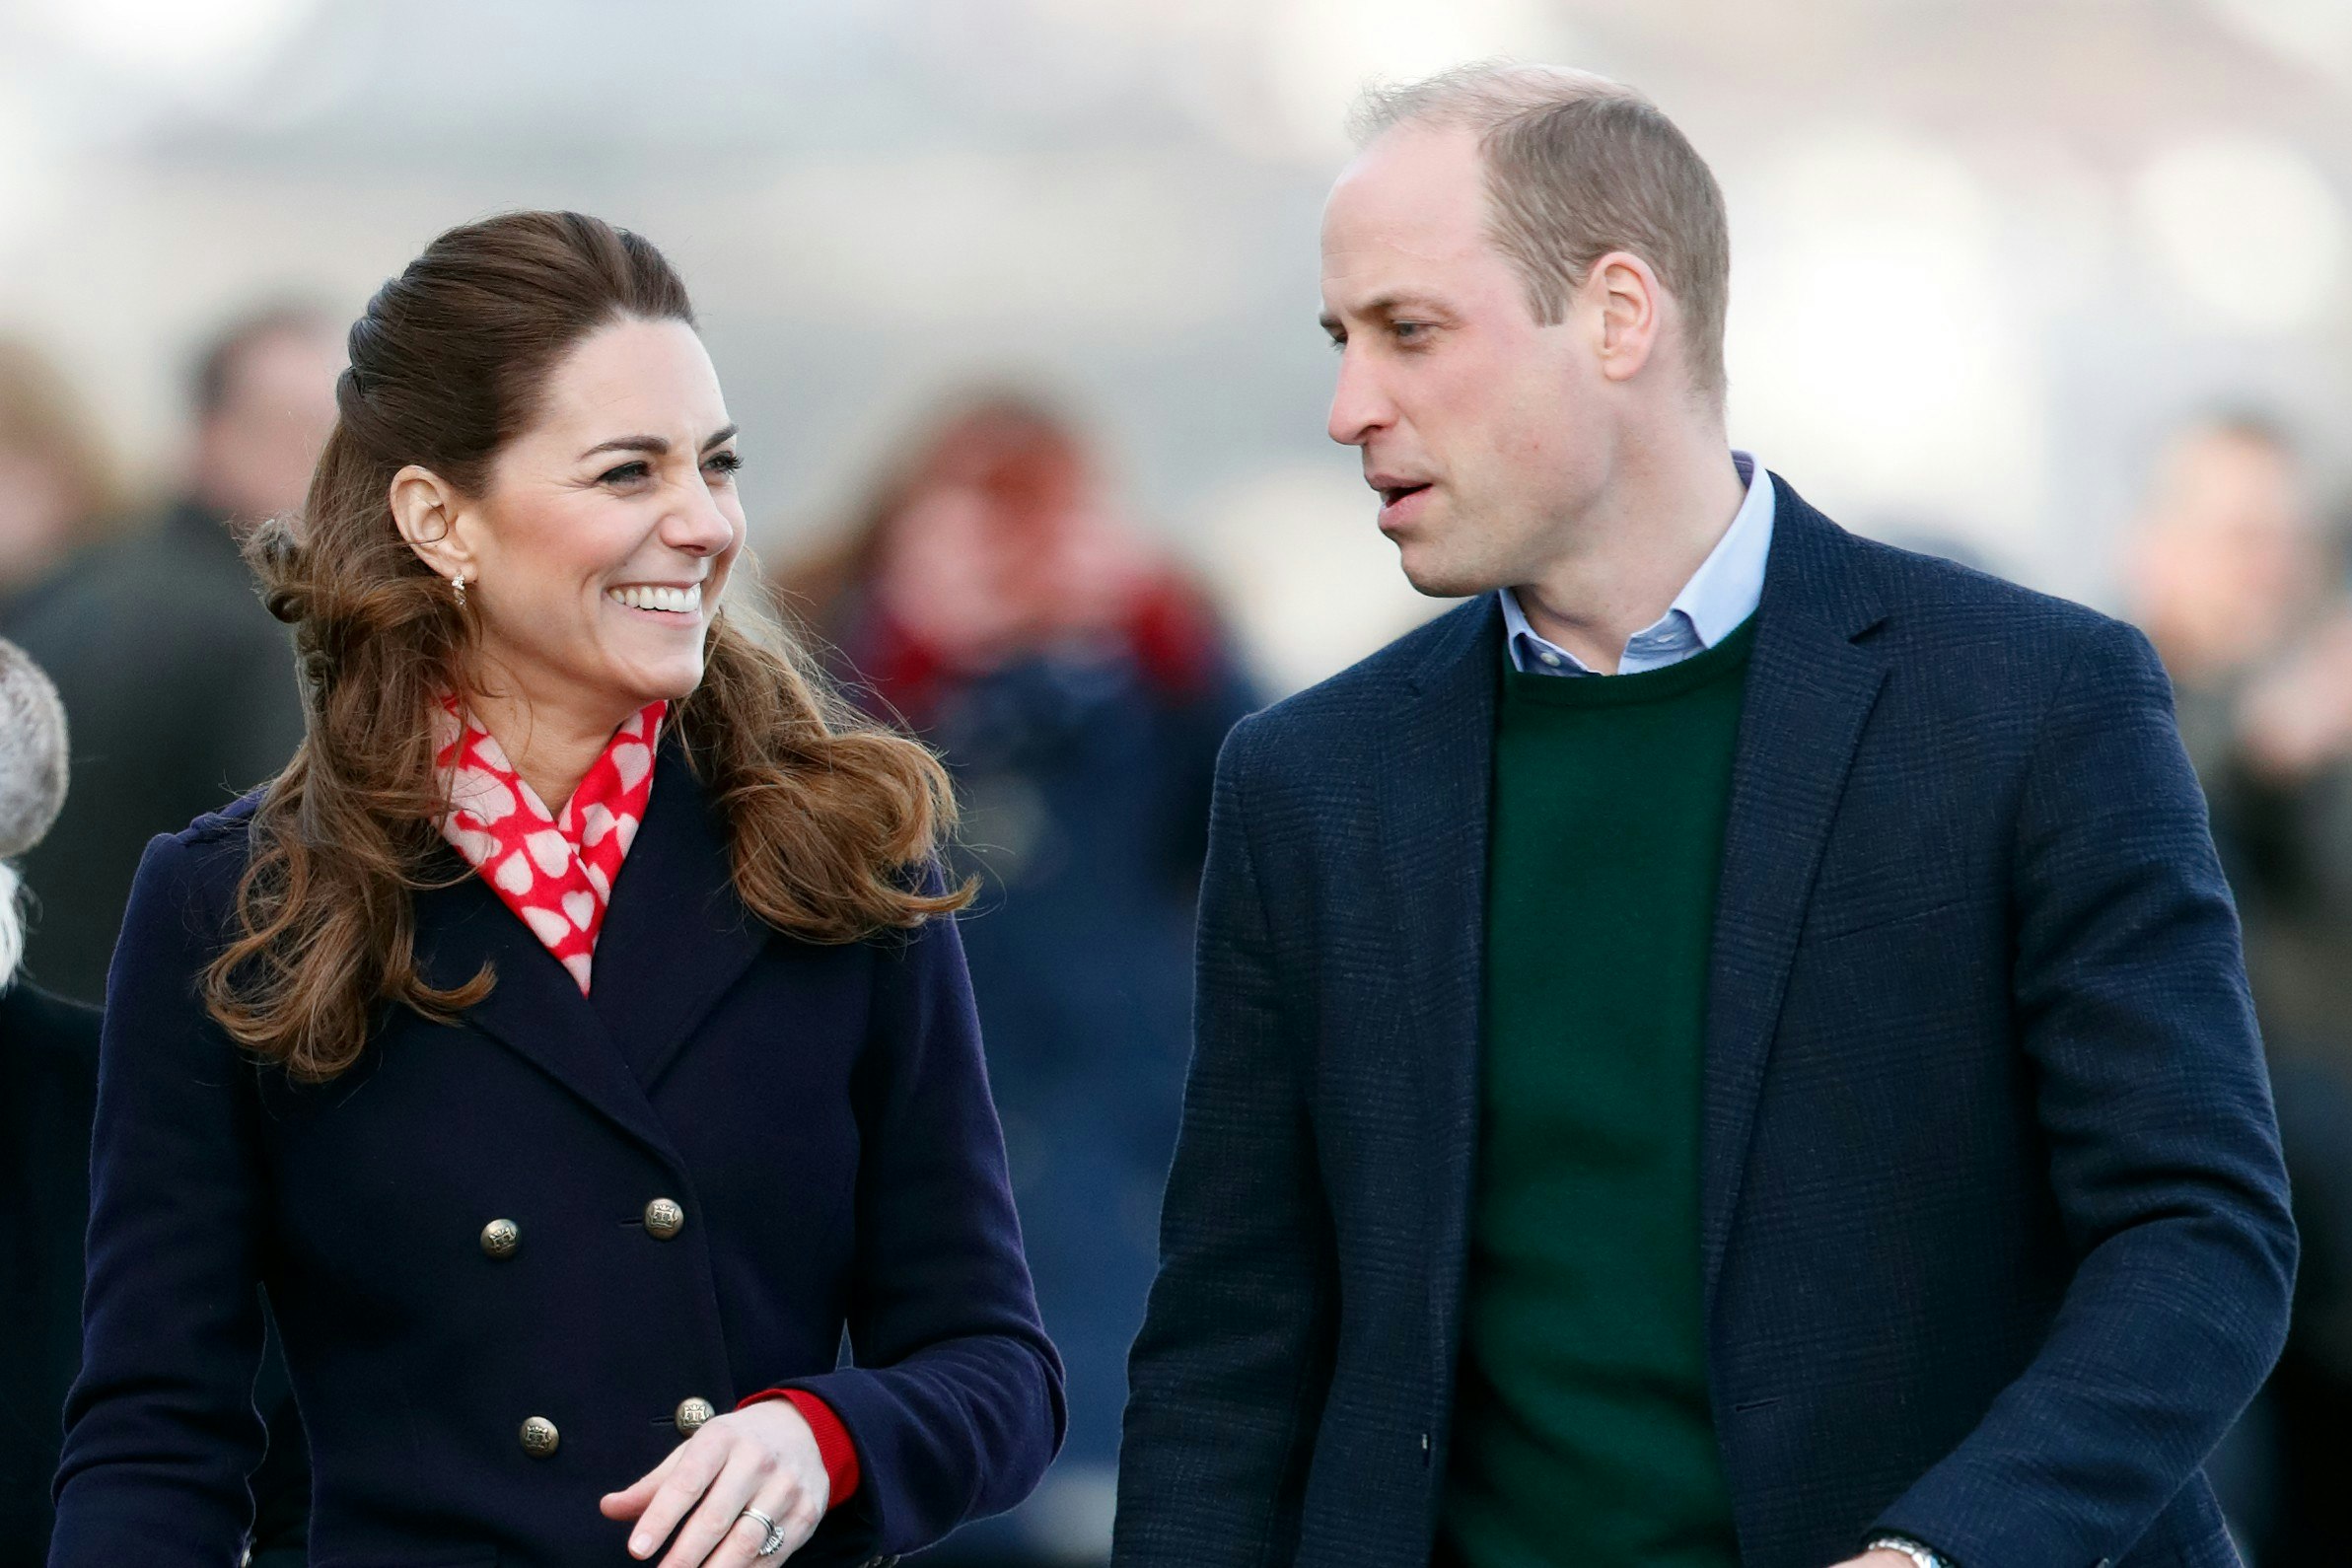 The Duke and Duchess of Cambridge talking to one another